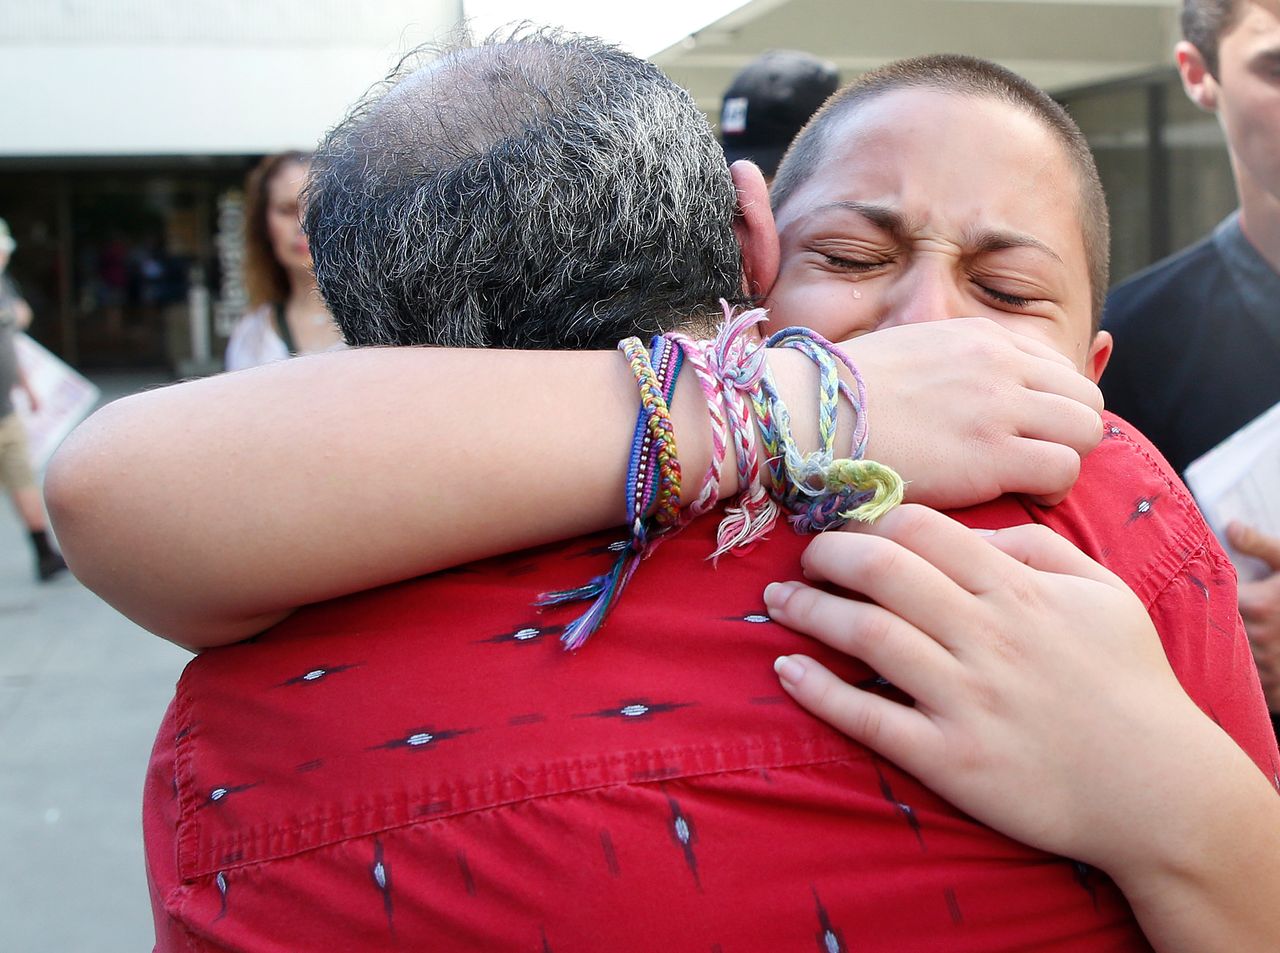 Marjory Stoneman Douglas High School student Emma González hugs her father Jose after speaking at a rally for gun control at the Broward County Federal Courthouse in Fort Lauderdale, Florida on Feb. 17, 2018.